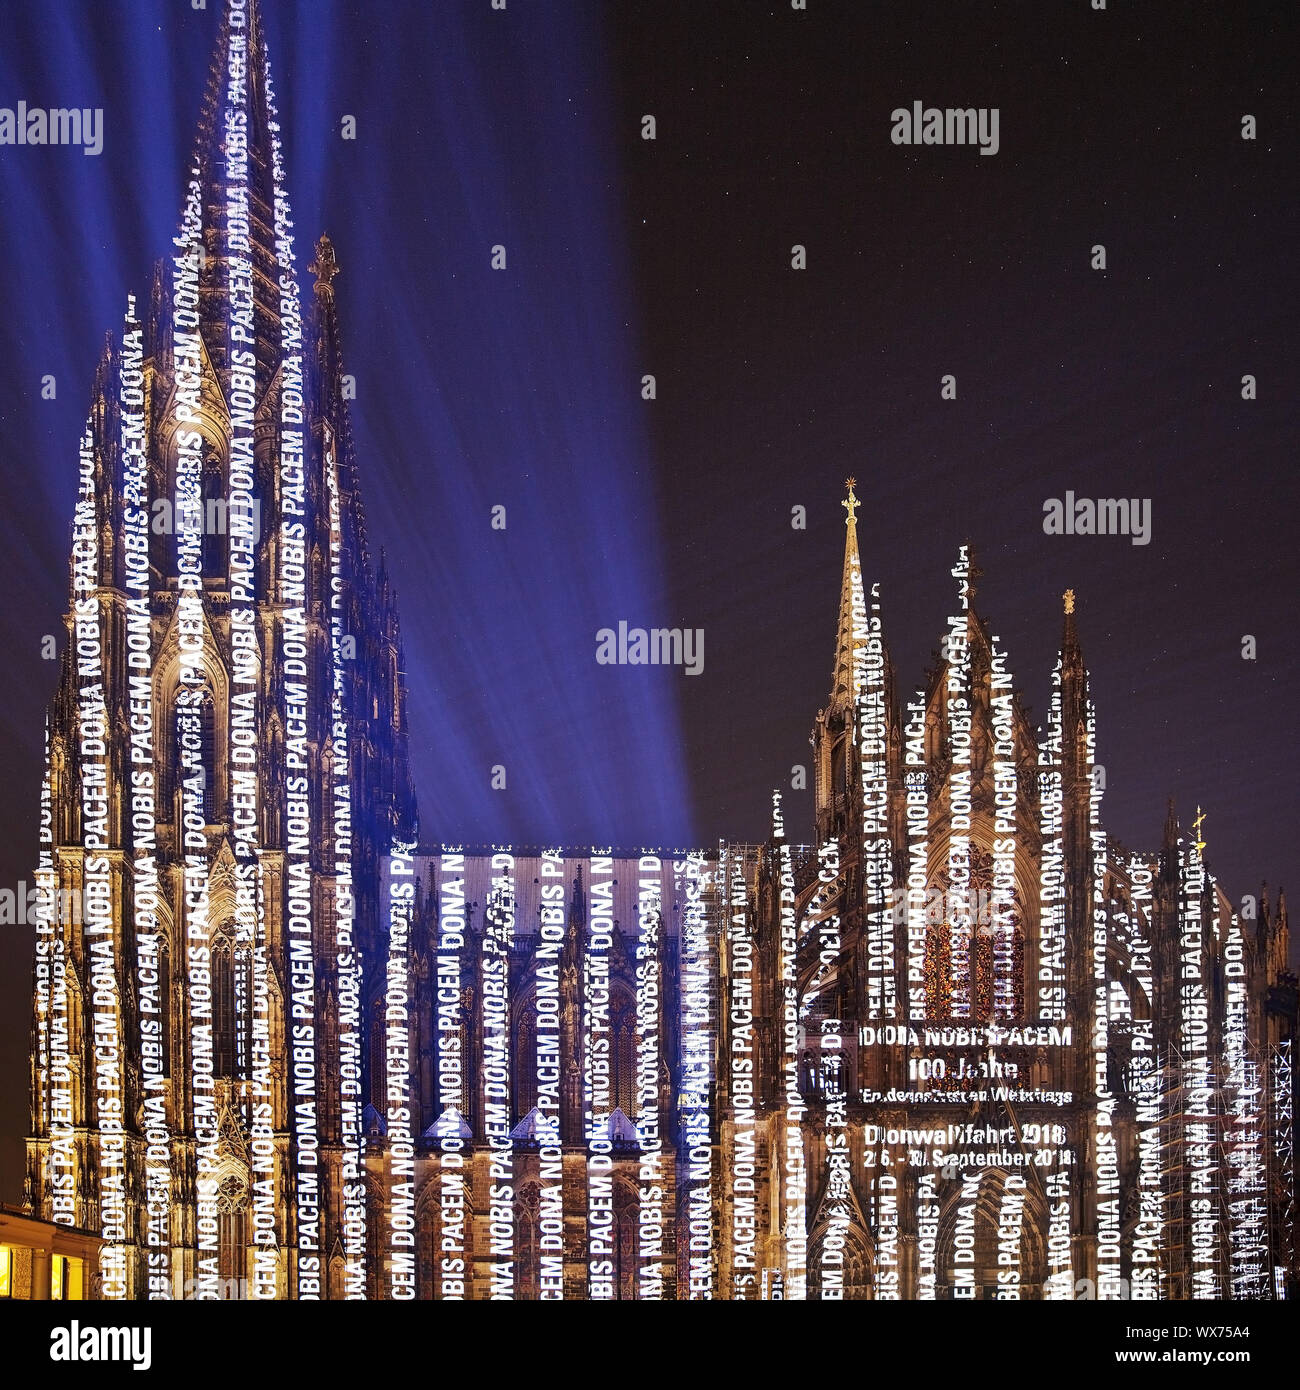 moving images illumination on Cologne Cathedral Dona Nobis Pacem, Cologne, Germany, Europe Stock Photo